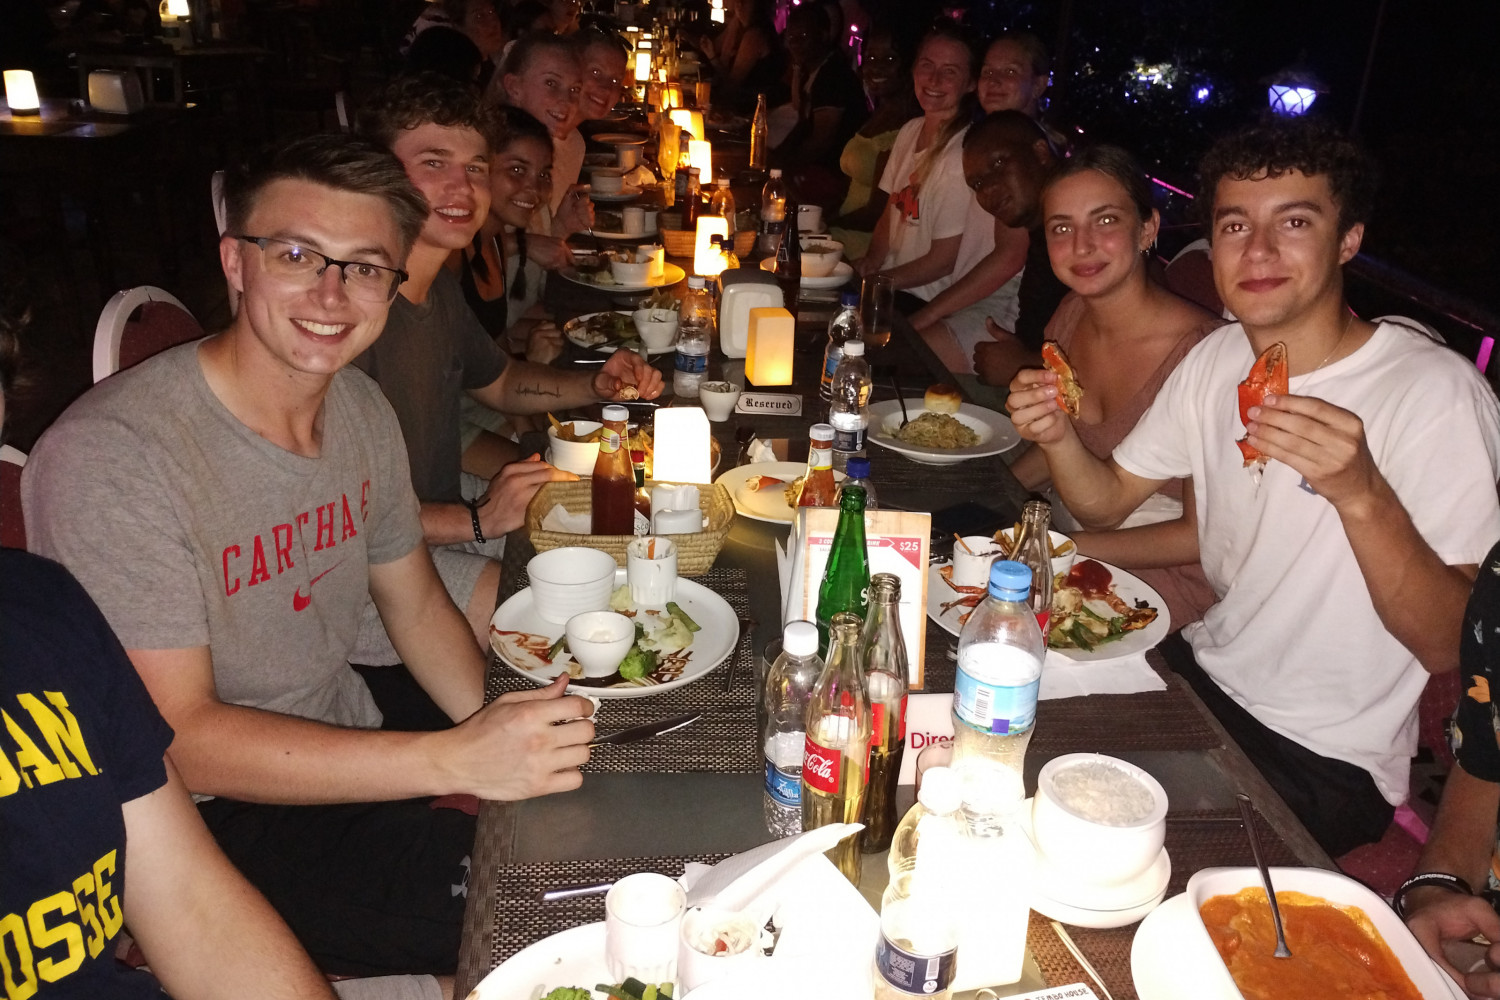 Carthage students on the study tour in Tanzania.